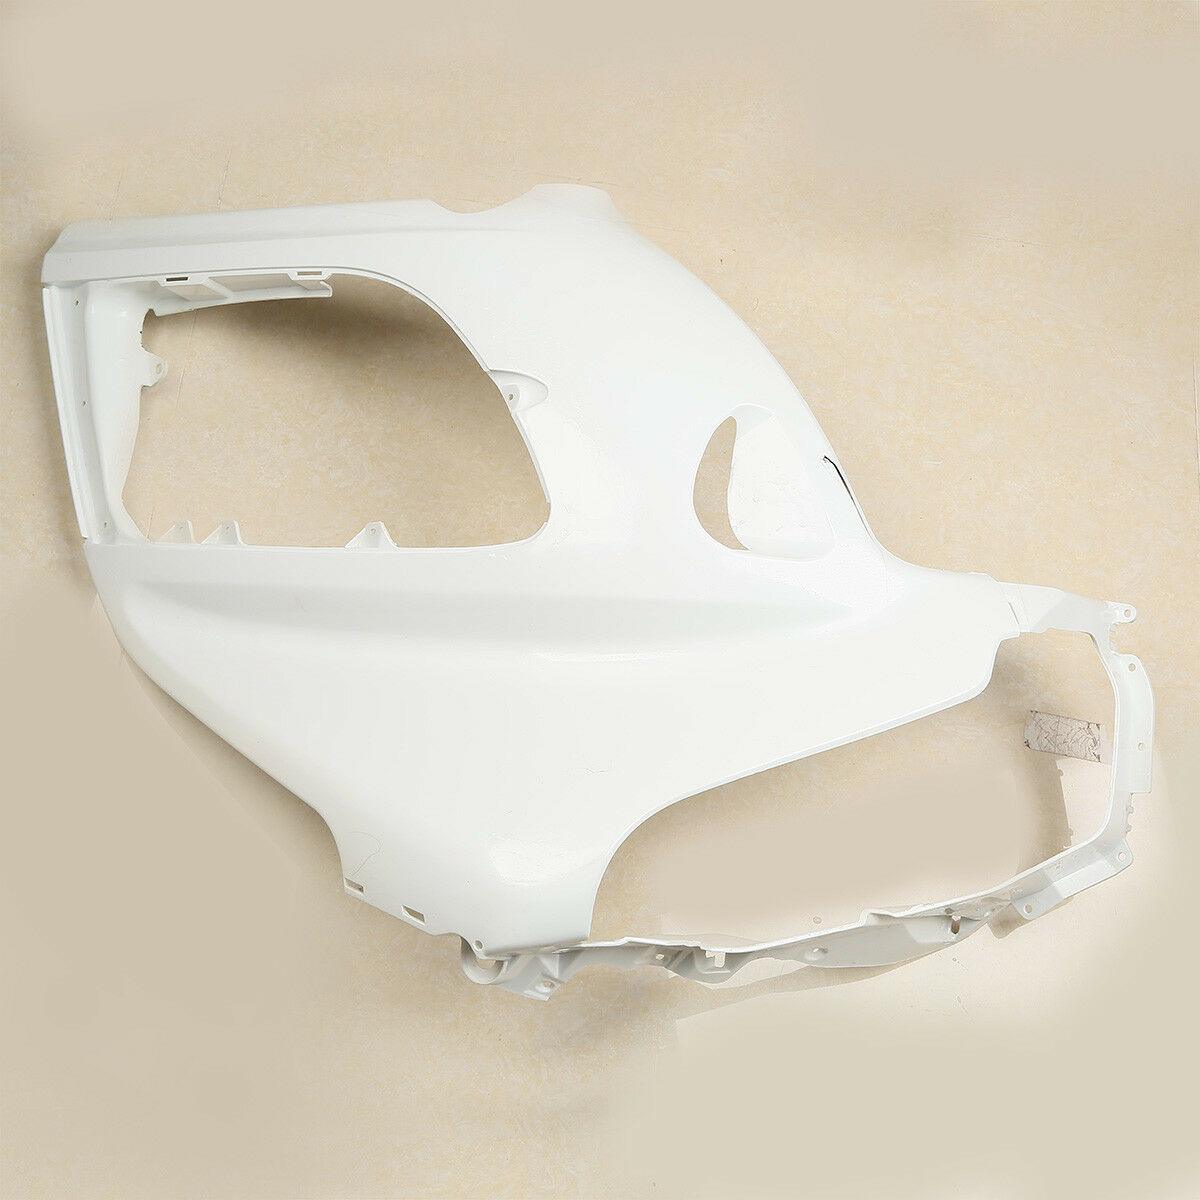 Left Front Cowl Fairing Cover FitFor Honda Goldwing GL1800 01-11 Unpainted White - Moto Life Products